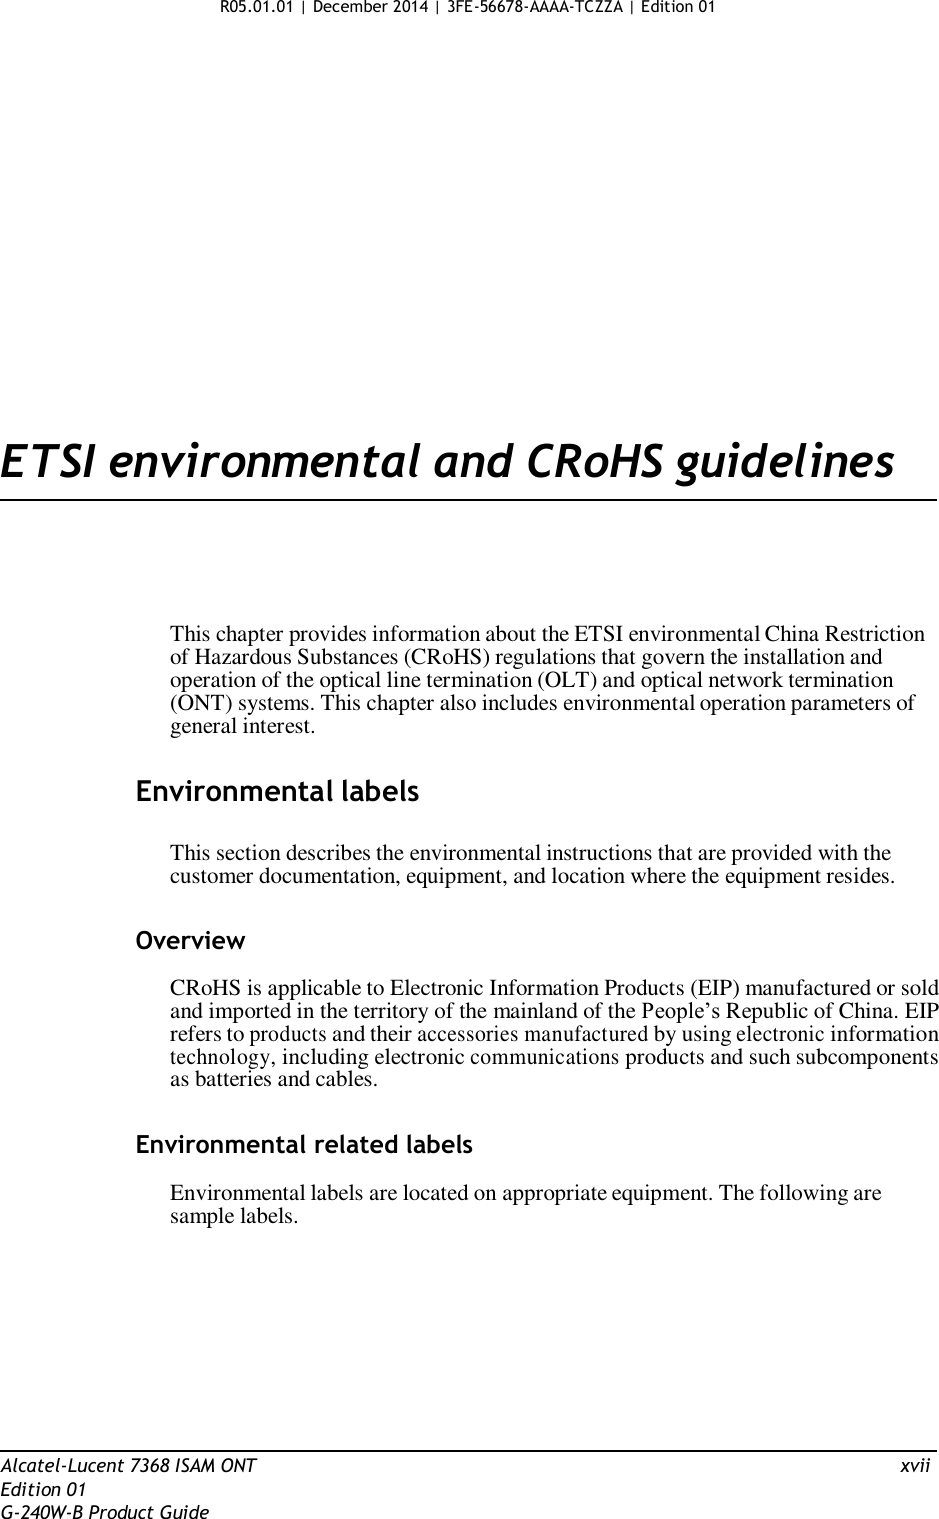 R05.01.01 | December 2014 | 3FE-56678-AAAA-TCZZA | Edition 01                      ETSI environmental and CRoHS guidelines       This chapter provides information about the ETSI environmental China Restriction of Hazardous Substances (CRoHS) regulations that govern the installation and operation of the optical line termination (OLT) and optical network termination (ONT) systems. This chapter also includes environmental operation parameters of general interest.   Environmental labels   This section describes the environmental instructions that are provided with the customer documentation, equipment, and location where the equipment resides.   Overview  CRoHS is applicable to Electronic Information Products (EIP) manufactured or sold and imported in the territory of the mainland of the People’s Republic of China. EIP refers to products and their accessories manufactured by using electronic information technology, including electronic communications products and such subcomponents as batteries and cables.   Environmental related labels  Environmental labels are located on appropriate equipment. The following are sample labels.            Alcatel-Lucent 7368 ISAM ONT  xvii Edition 01 G-240W-B Product Guide 